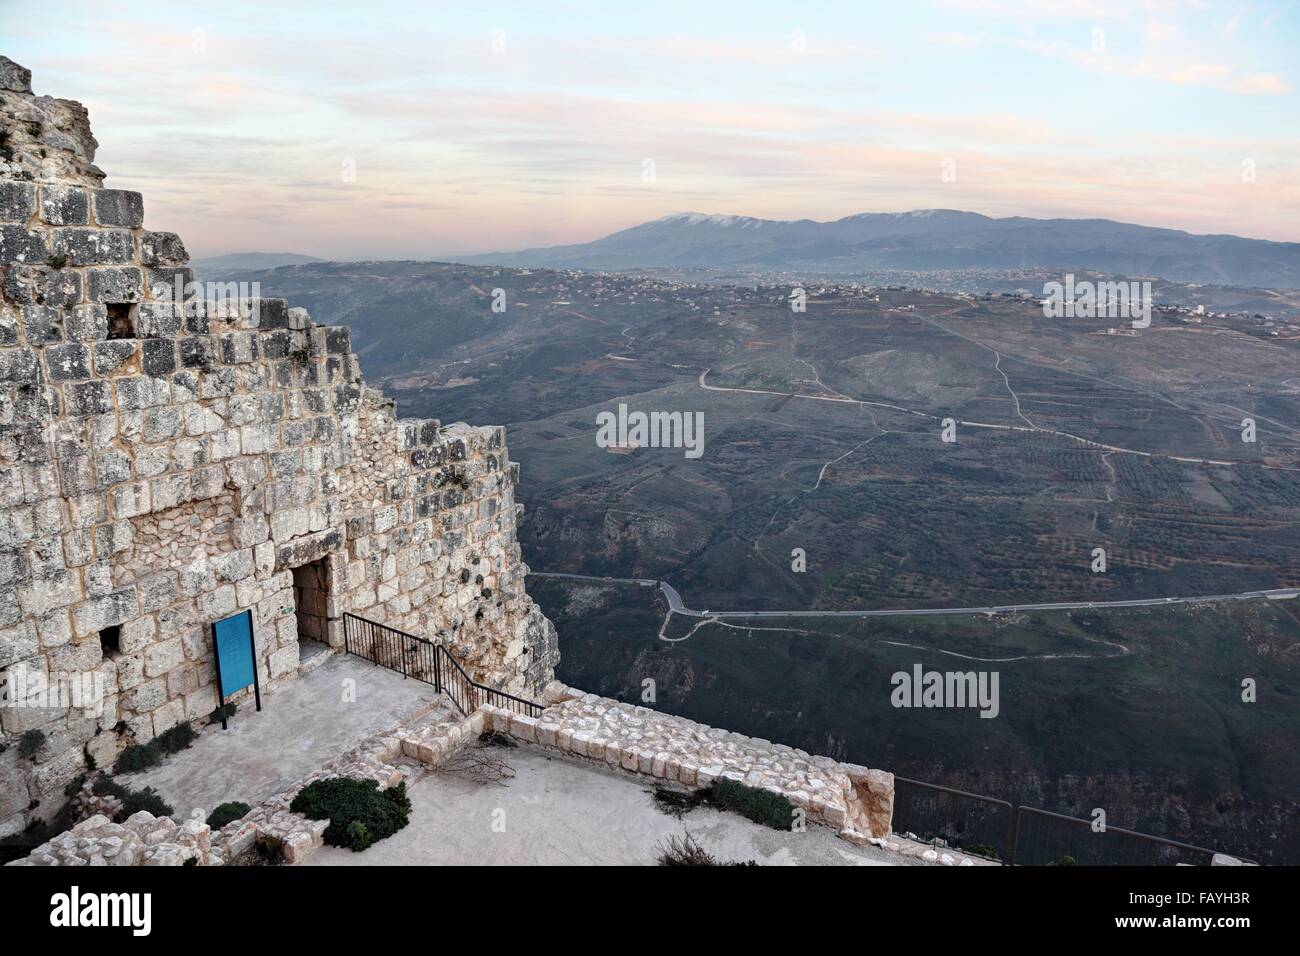 The Litani Valley from Beaufort Crusader Castle, Lebanon Stock Photo